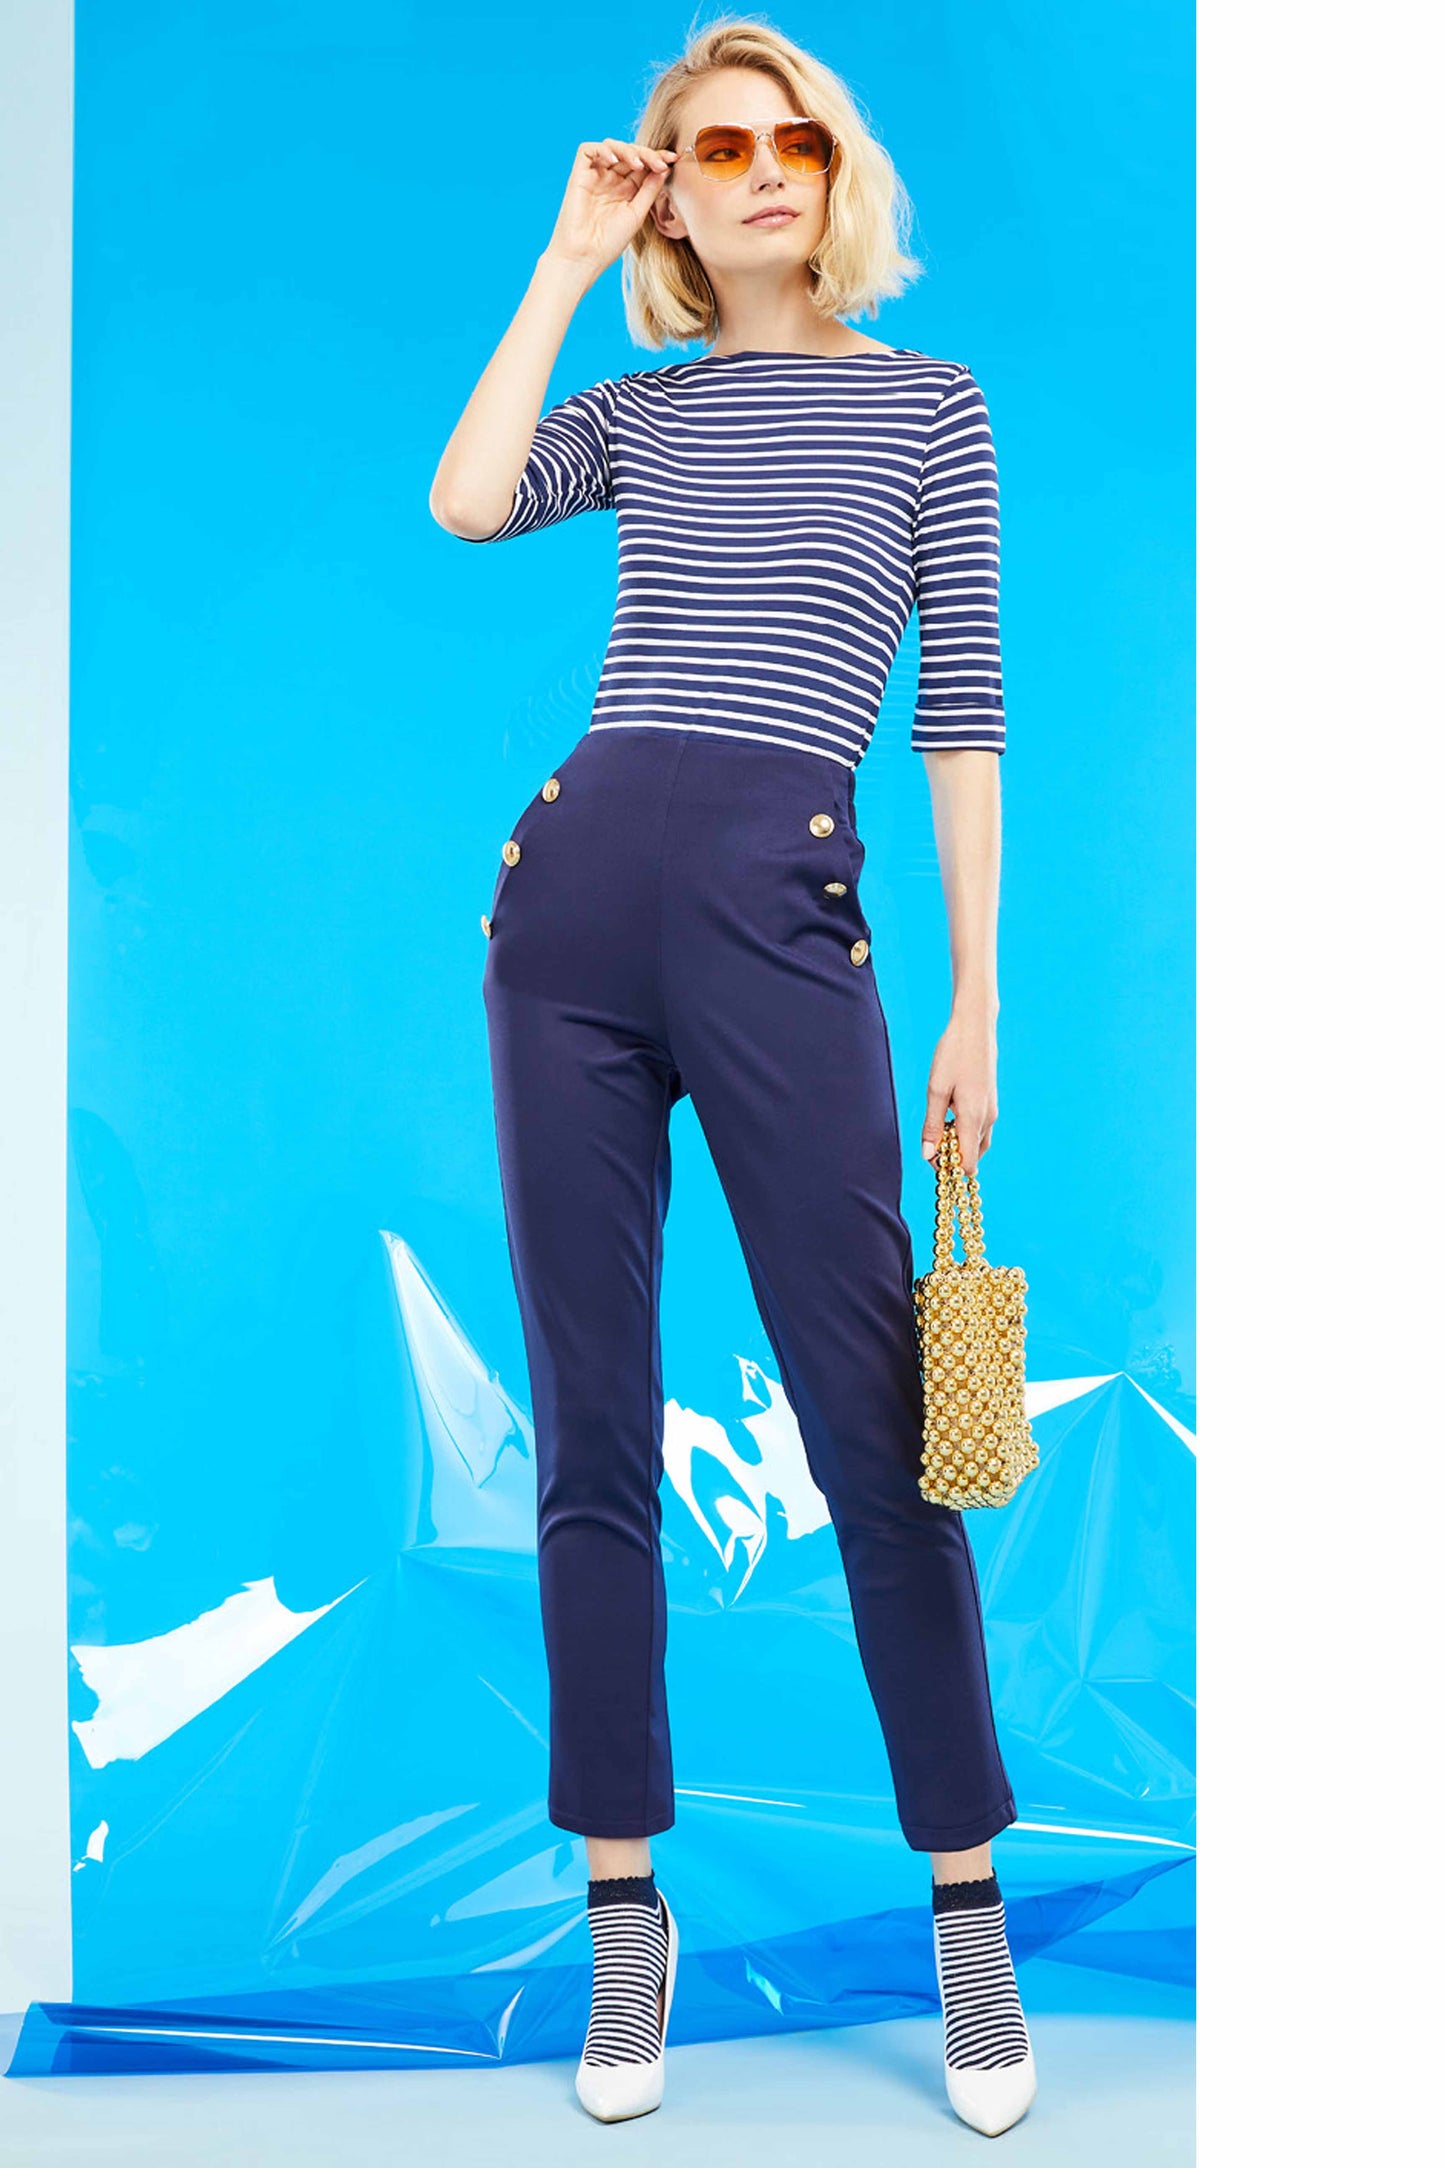 SiSi Brigitte Trouser - High waisted navy blue trouser leggings with elasticated waist band on the back, side pockets and big gold button details along the pockets. Worn with a stripe top, low ankle socks and white high heels..